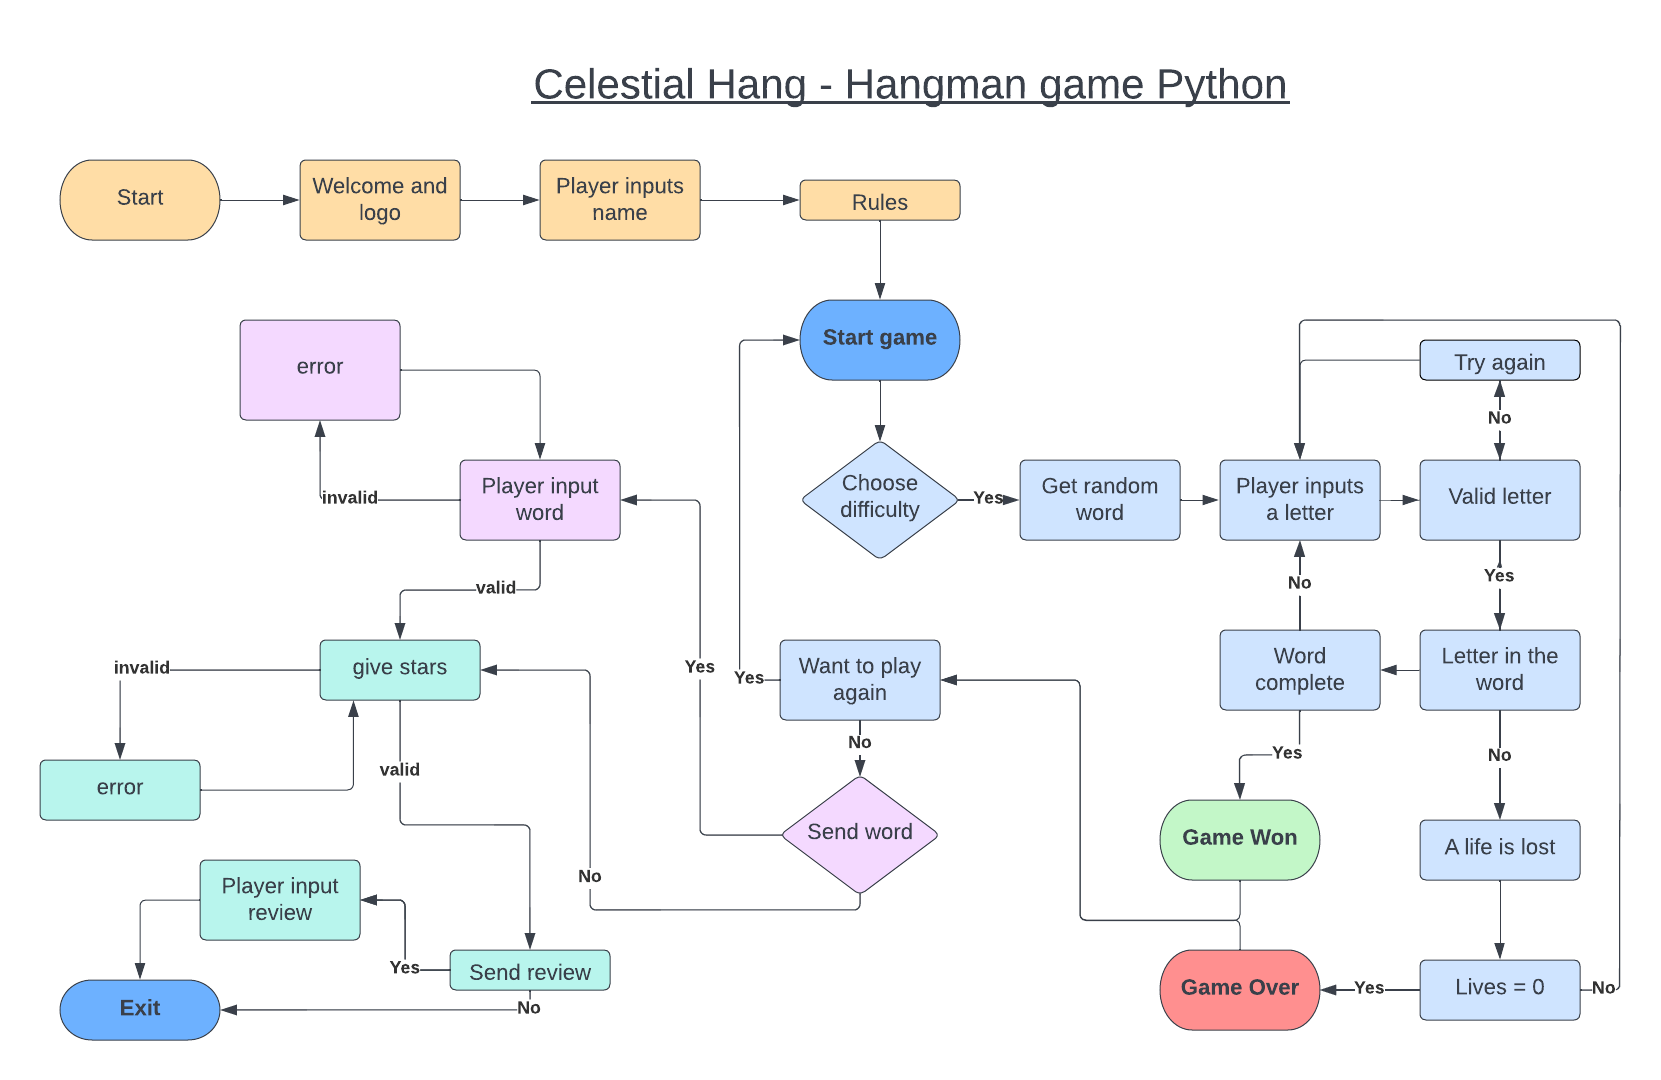 Flowchart for the basic game